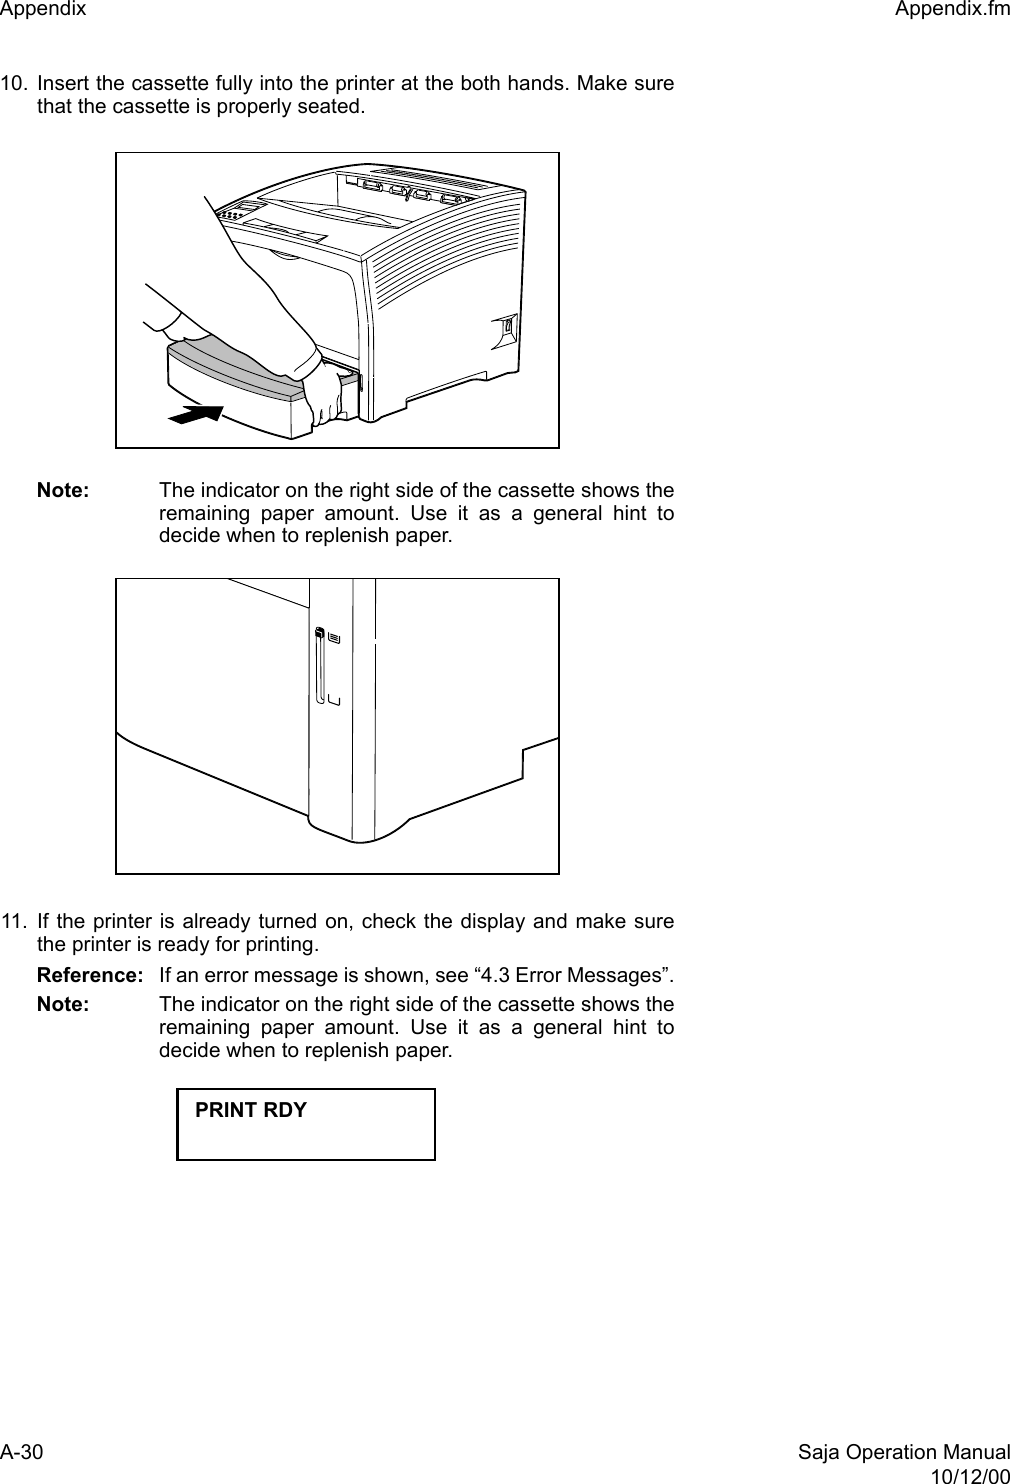 A-30 Saja Operation Manual10/12/00Appendix  Appendix.fm10. Insert the cassette fully into the printer at the both hands. Make surethat the cassette is properly seated.Note: The indicator on the right side of the cassette shows theremaining paper amount. Use it as a general hint todecide when to replenish paper.11. If the printer is already turned on, check the display and make surethe printer is ready for printing.Reference: If an error message is shown, see “4.3 Error Messages”.Note: The indicator on the right side of the cassette shows theremaining paper amount. Use it as a general hint todecide when to replenish paper.PRINT RDY